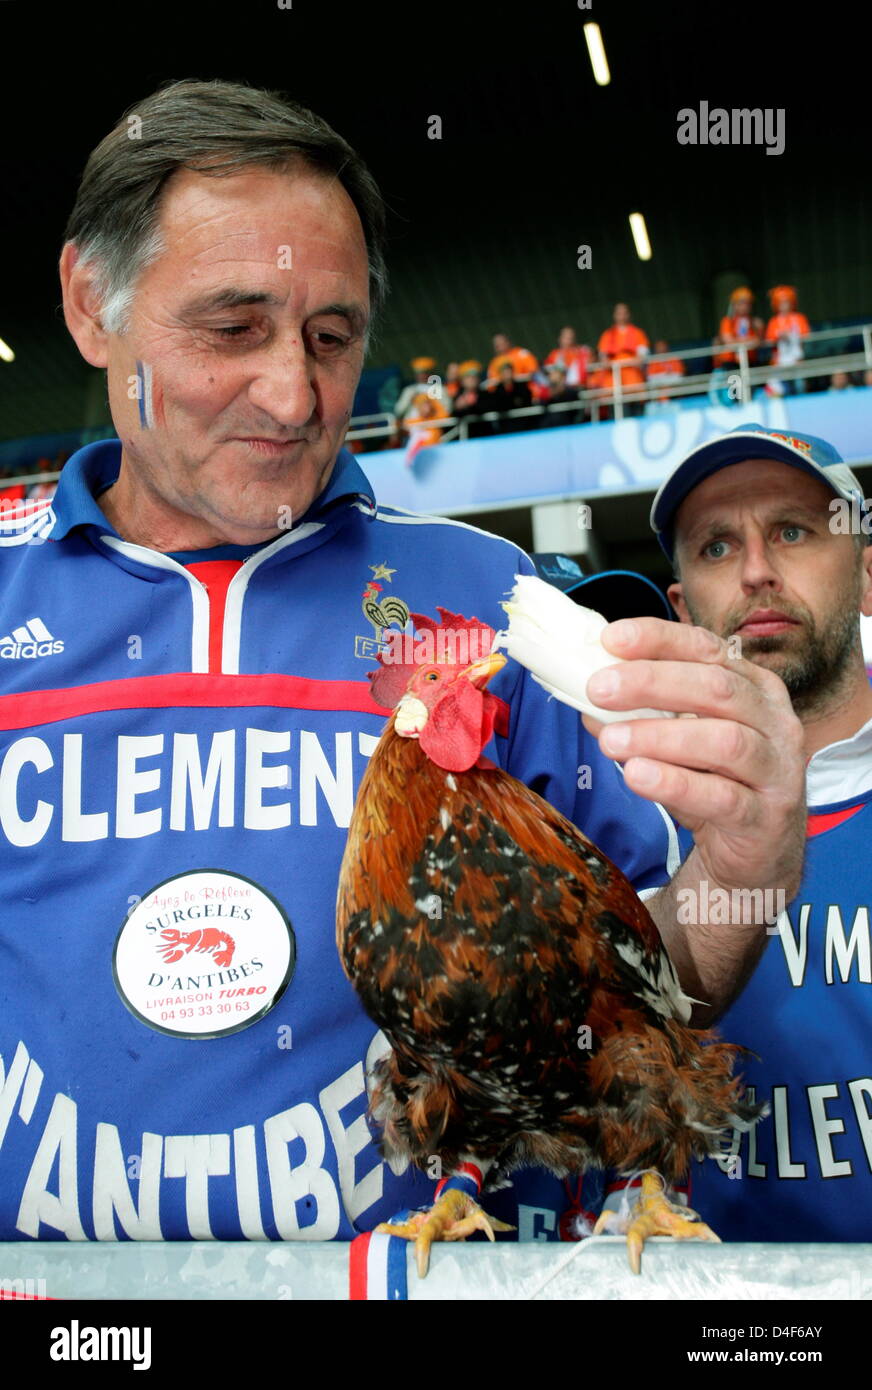 French fan 'Clement d' Antibes' feeds his cockerel with asparagus prior to the UEFA EURO 2008 Group C preliminary round match between Netherlands and France at the Stade de Suisse stadium in Berne, Switzerland, 13 June 2008. Photo: Ronald Wittek dpa +please note UEFA restrictions particulary in regard to slide shows and 'No Mobile Services'+ +++(c) dpa - Bildfunk+++ Stock Photo